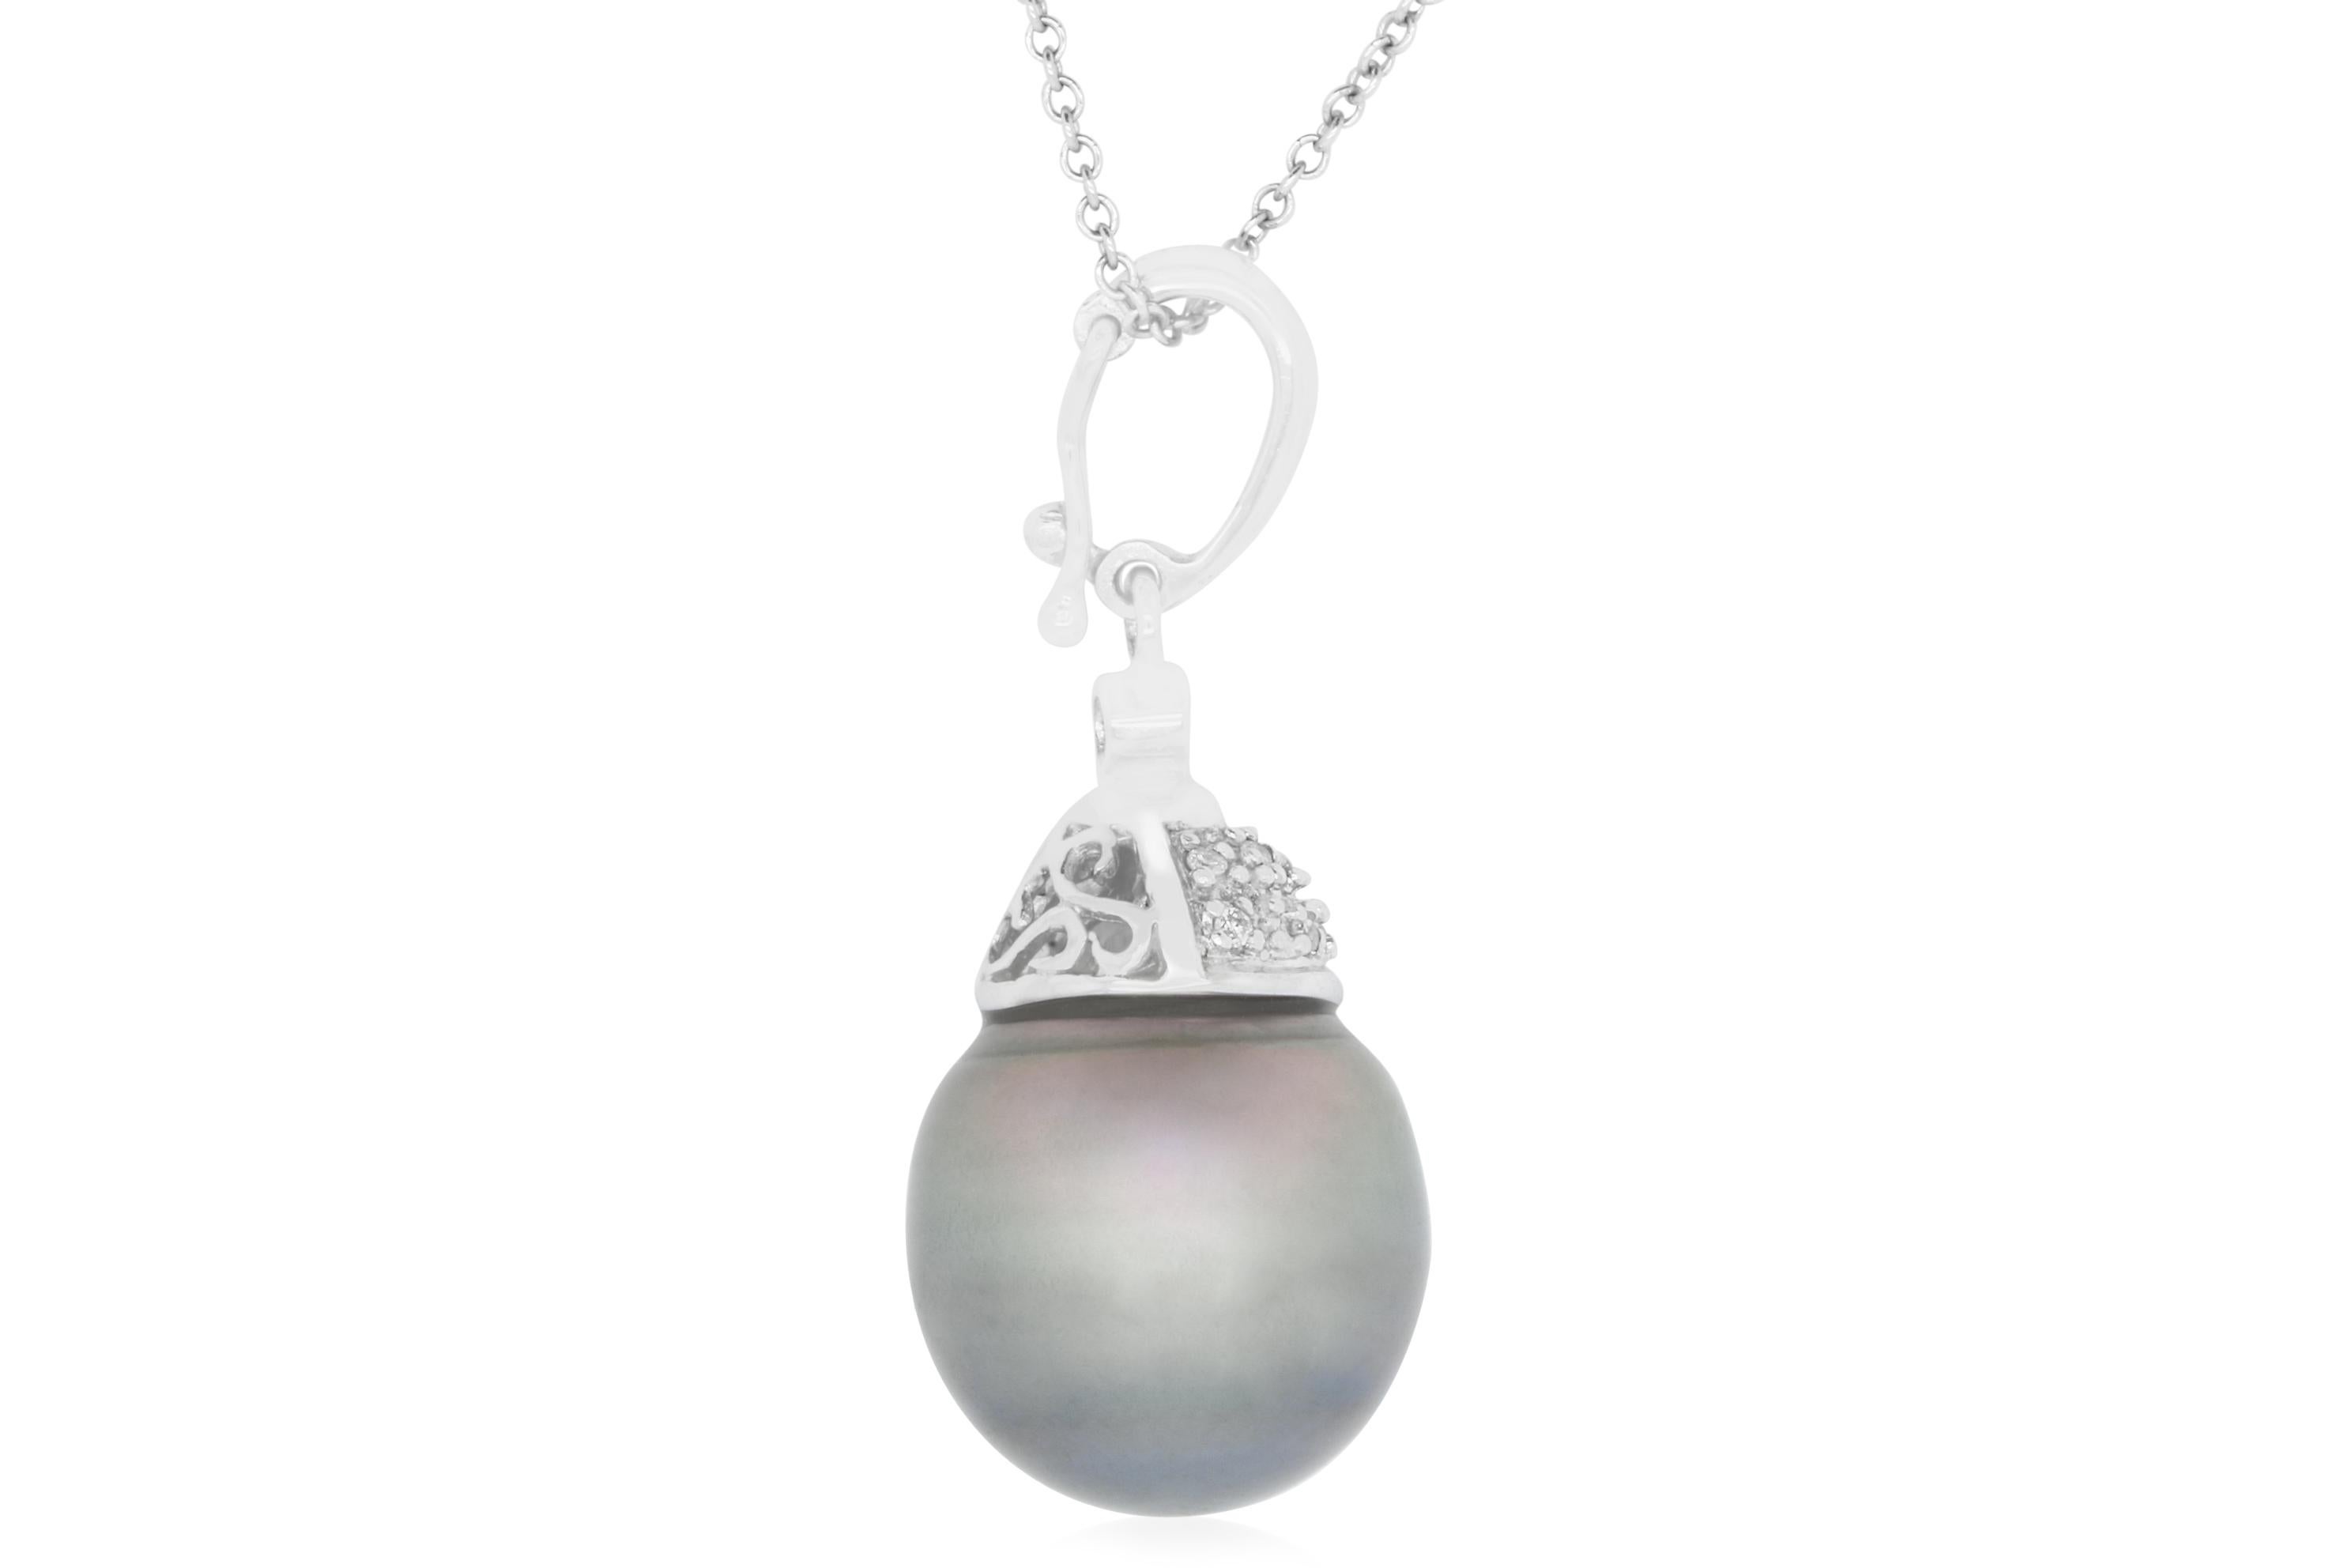 Material: 14K White Gold
Center Stone Details: 2.89 Carat Tahitian South Sea Pearl
Mounting Stone Details: 11 Brilliant Round White Diamonds 0.08 carat 
Chain: 18 inches

Fine one-of-a-kind craftsmanship meets incredible quality in this breathtaking